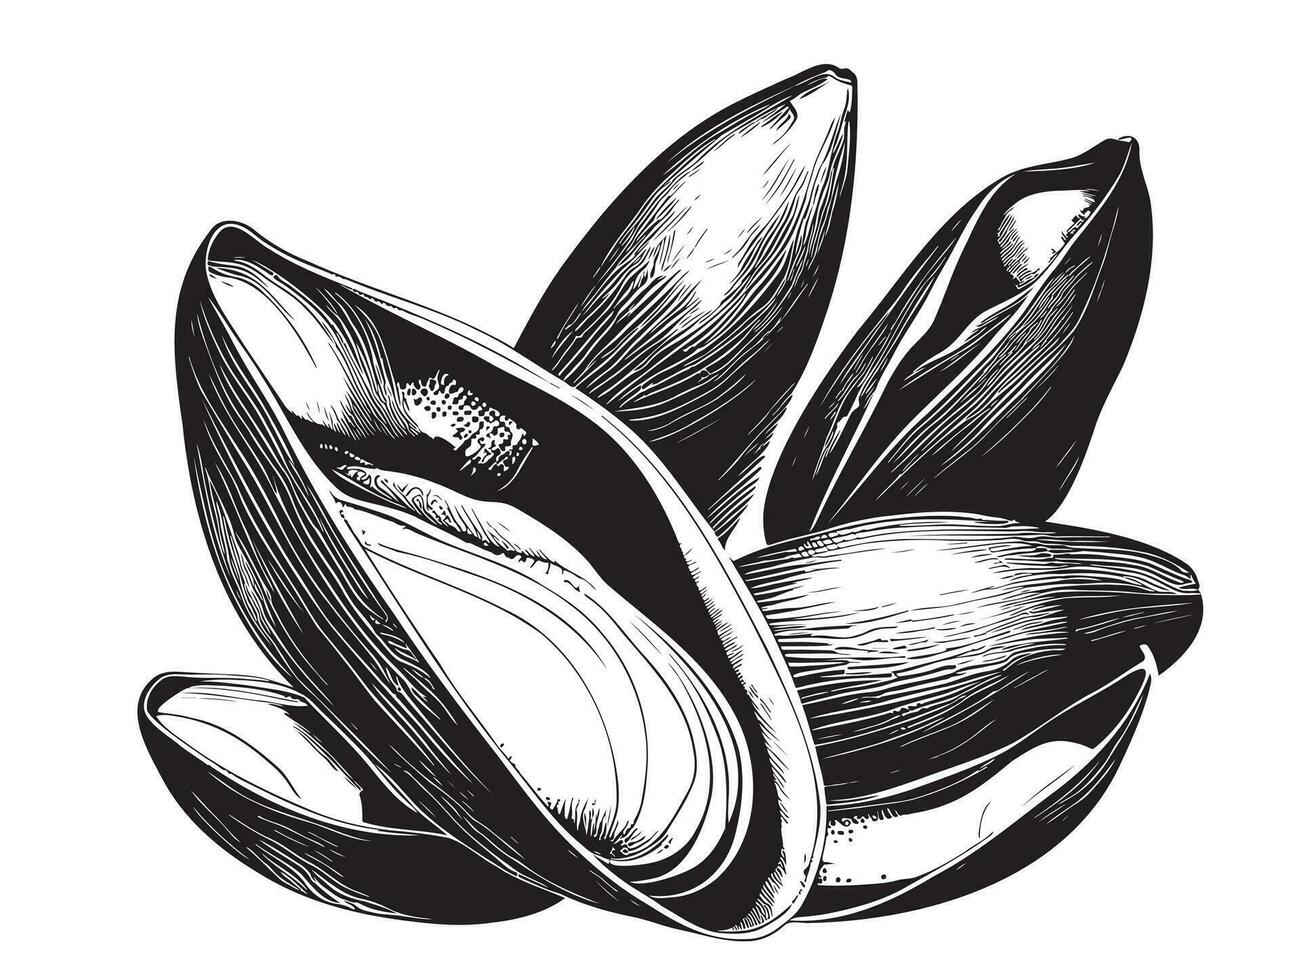 Mussels sea sketch drawn with hand vector illustration sea food